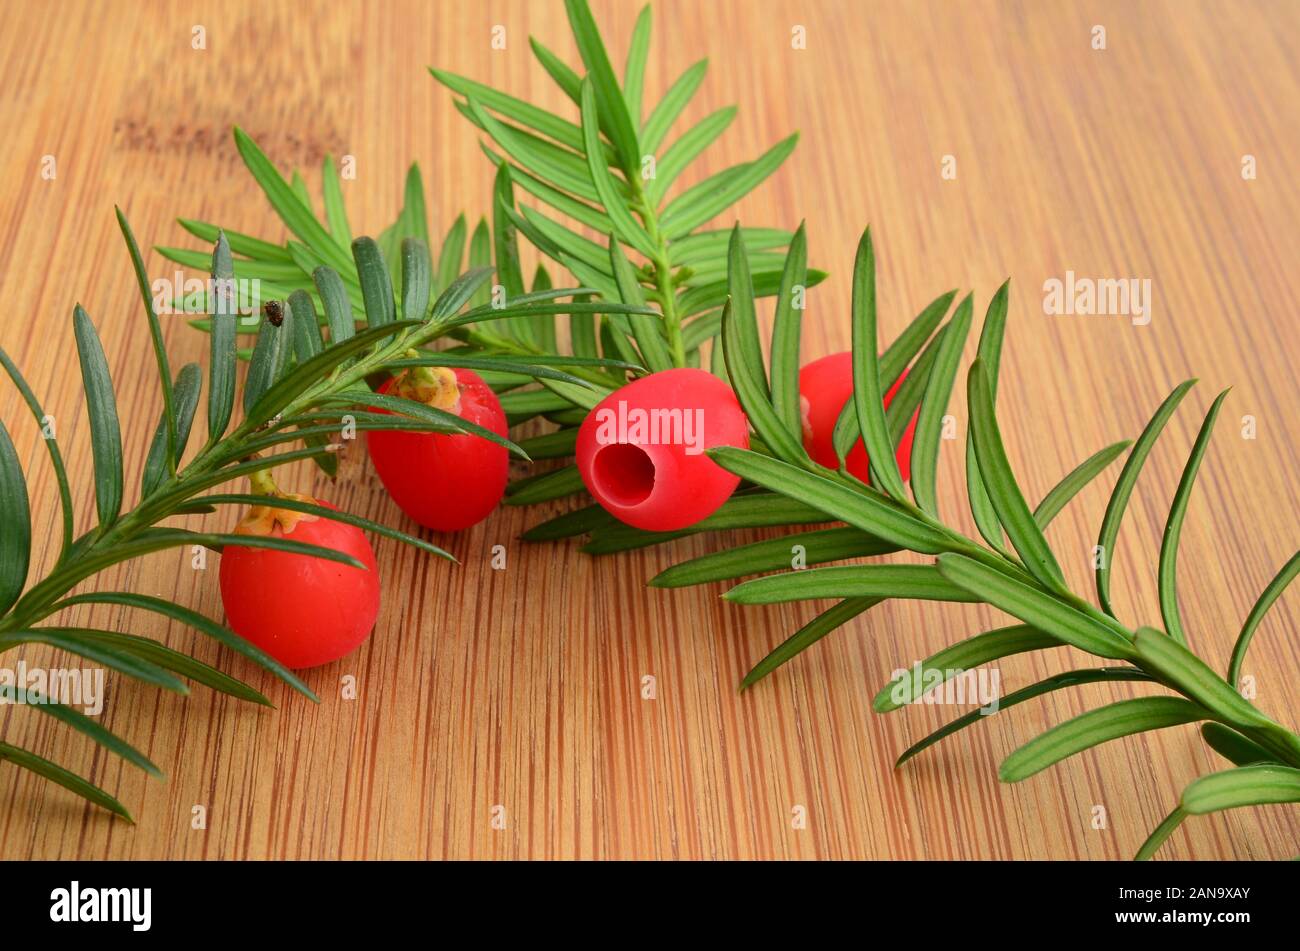 Two green, fresh yew twigs with ripe red berries on bamboo wooden chopping board, close up view Stock Photo